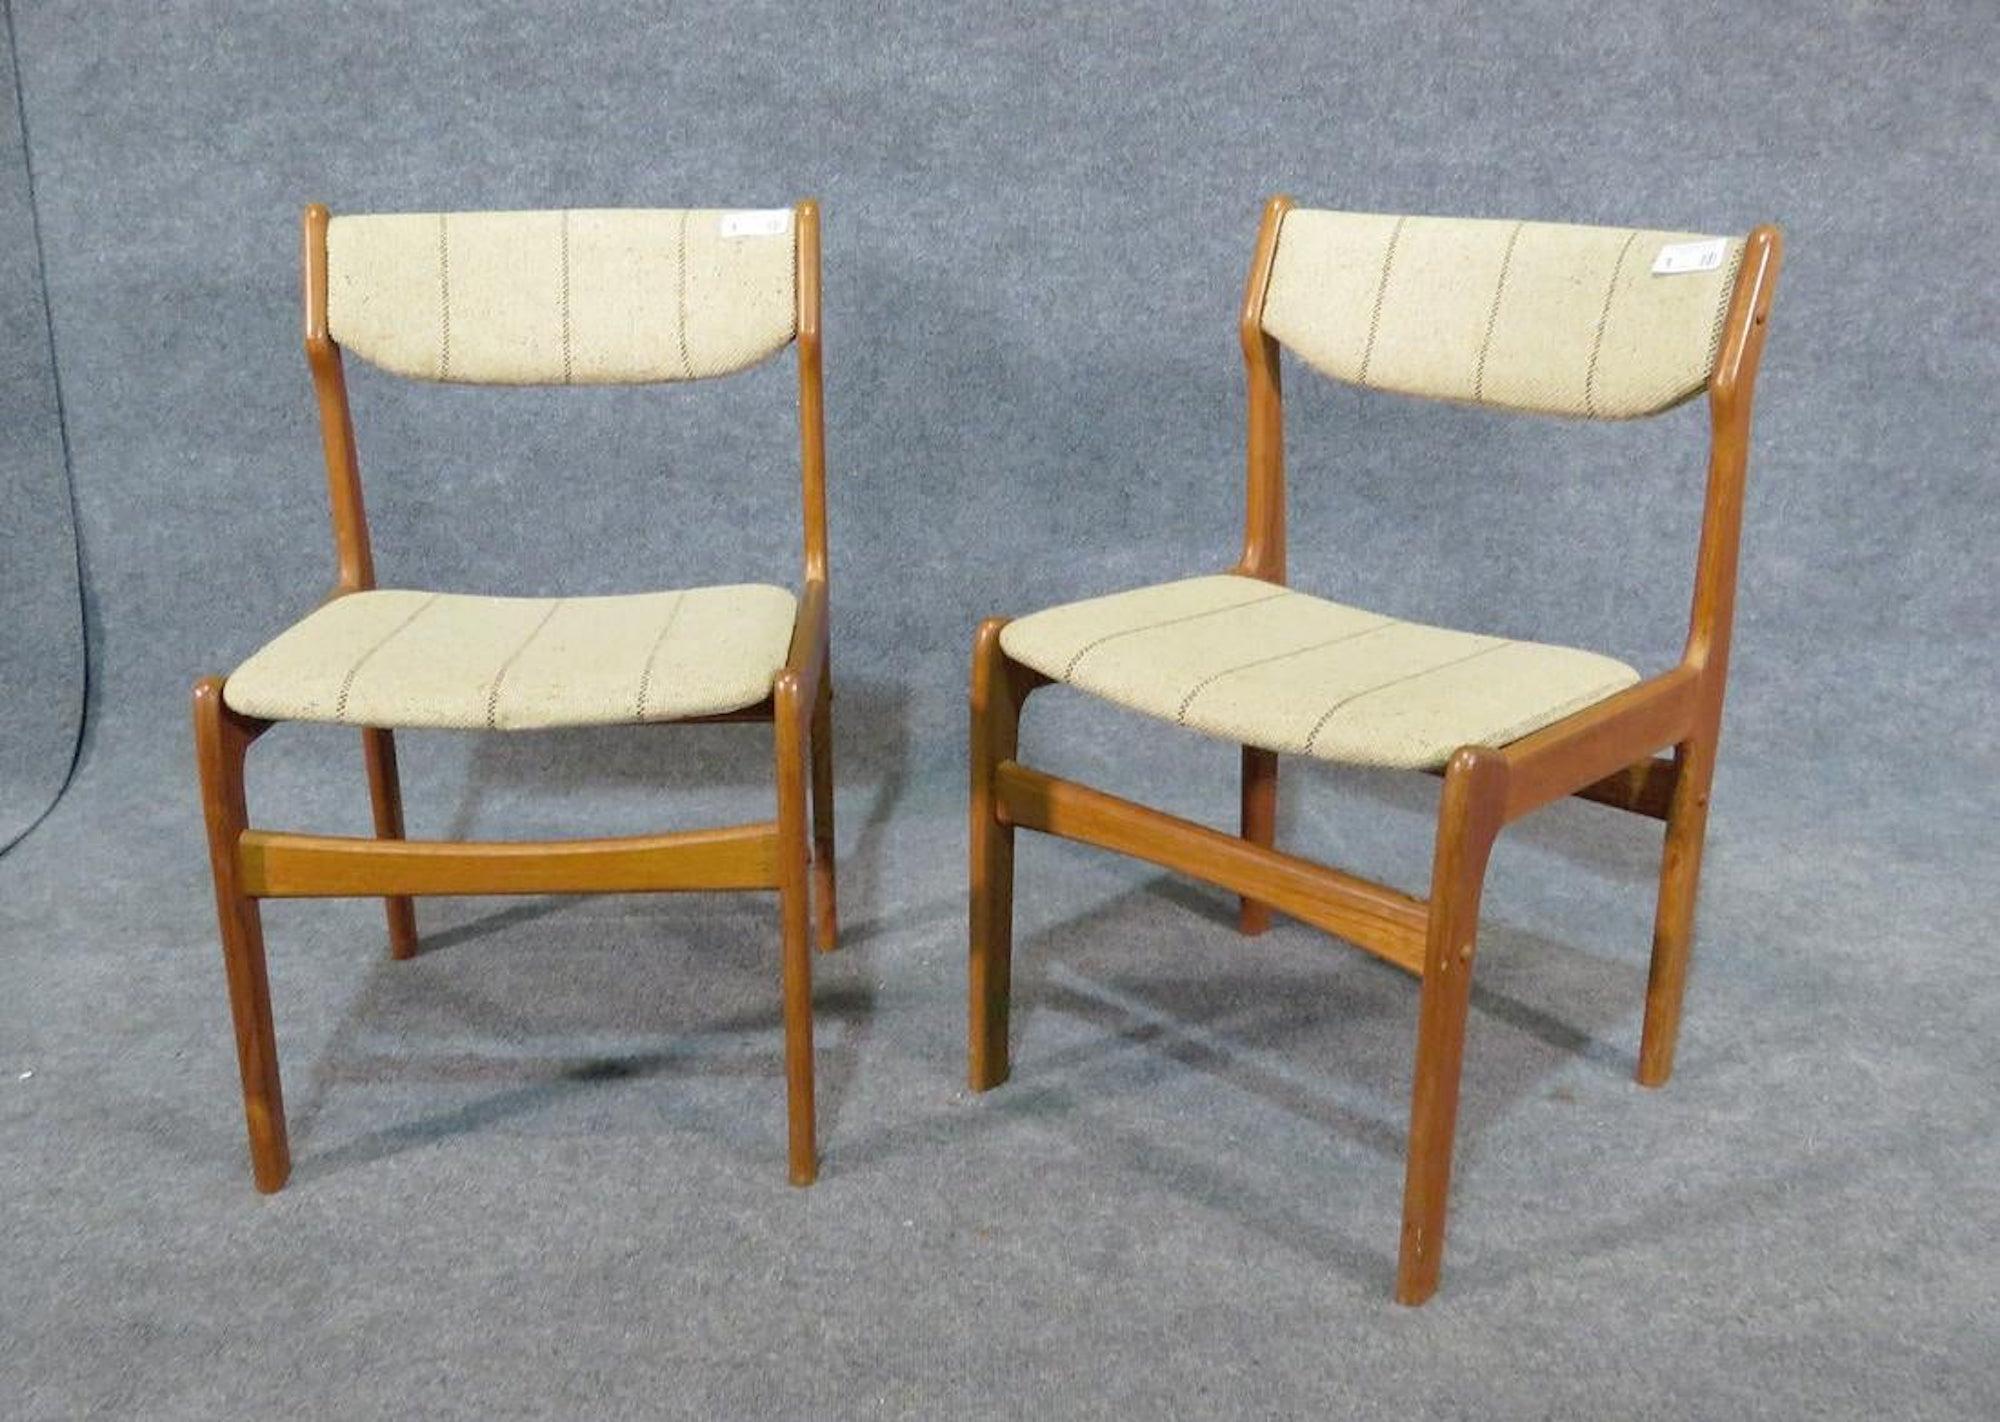 Erik Buch style teak dining chairs. Upholstered seat and back.
(Please confirm item location - NY or NJ - with dealer).
        